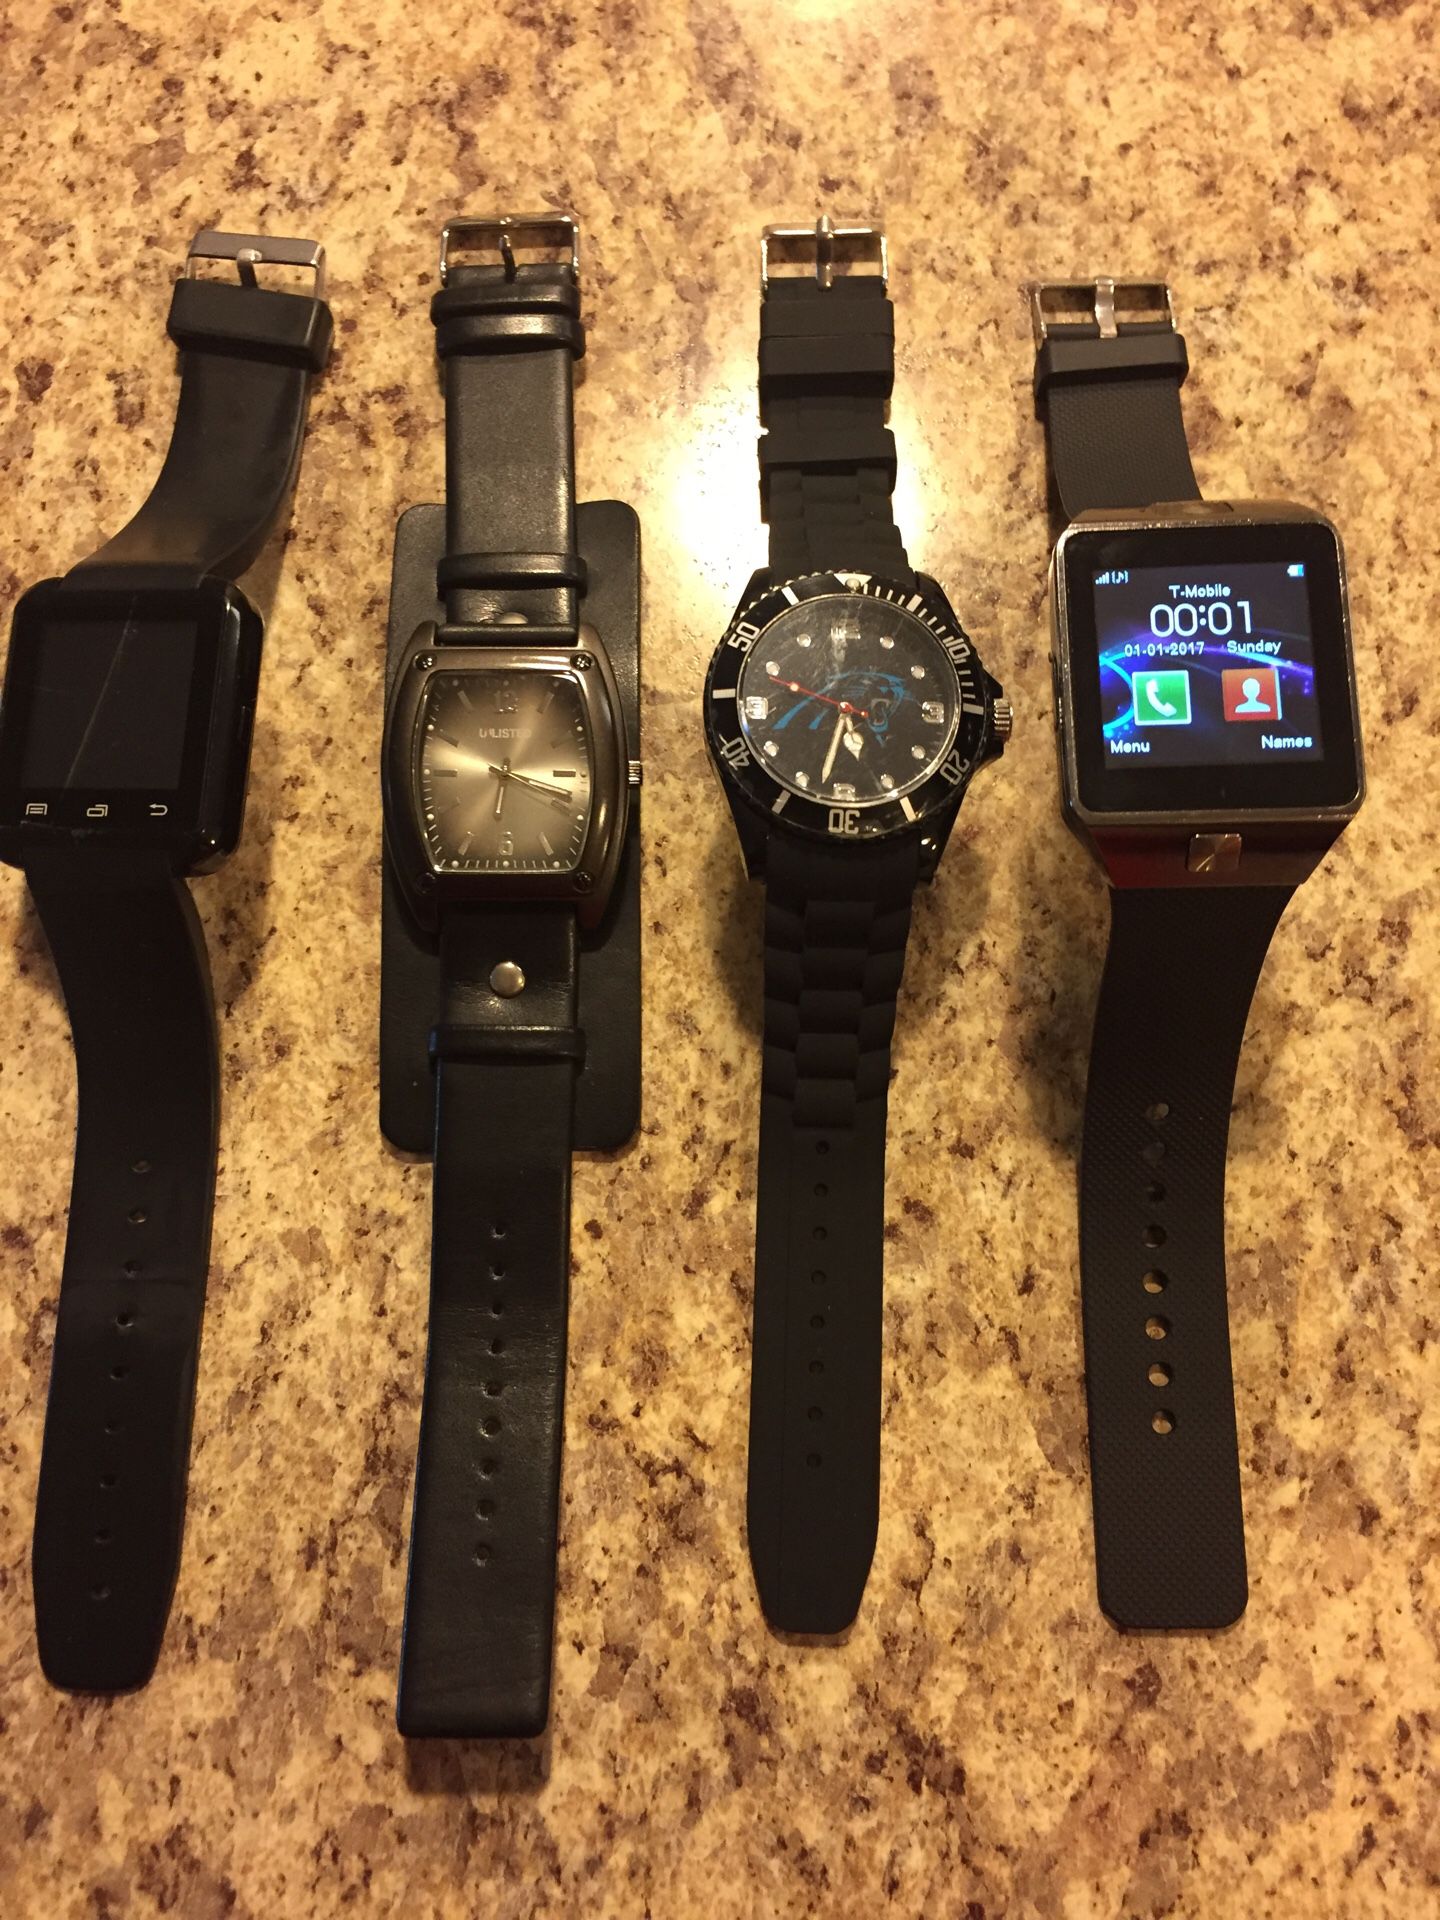 LOT 4 CAROLINA PANTHERS FOOTBALL KENNETH COLE UNLISTED HYPE SMART WATCHES $35 NEW Great Deal!!!!!!!! ALL 4 SOLD $35